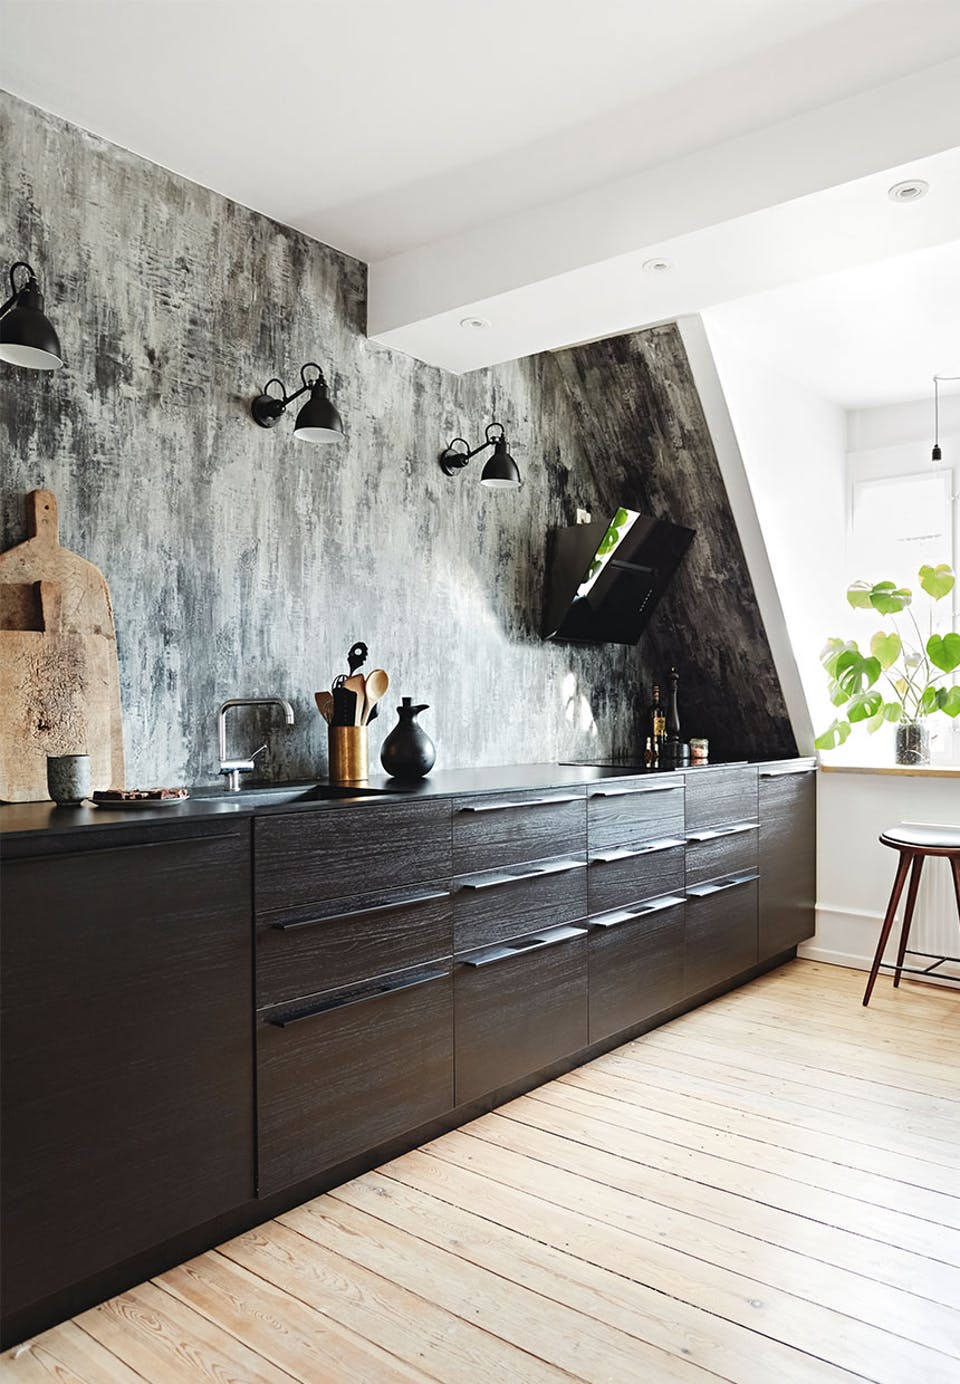 The kitchen features a graphic wallpaper wall as a backsplash, there are black cabinets and wall lamps